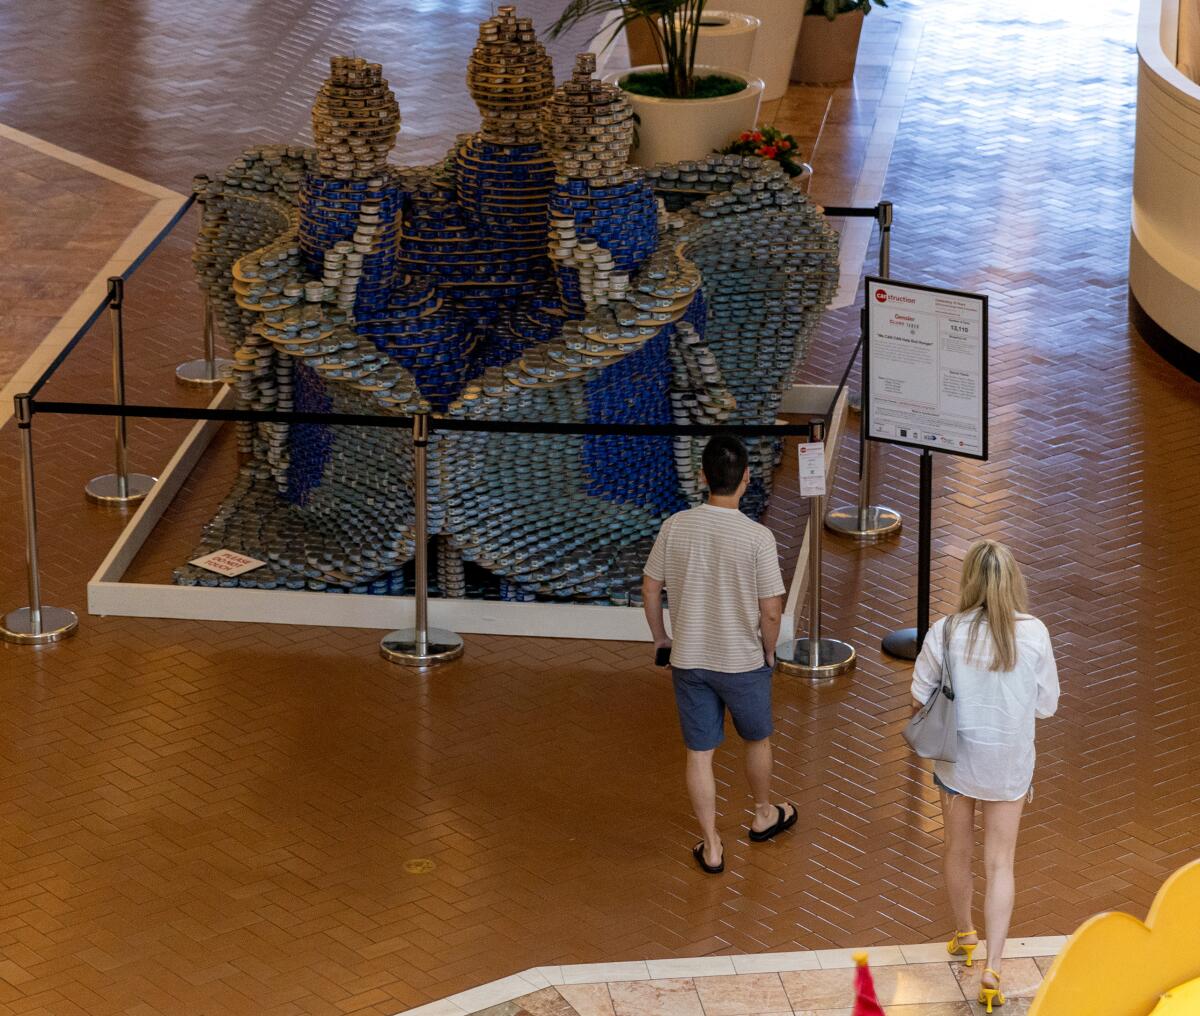 Gensler+Clune+Taber's sculpture "We CAN CAN Help End Hunger" is composed of 13,100 tuna cans.